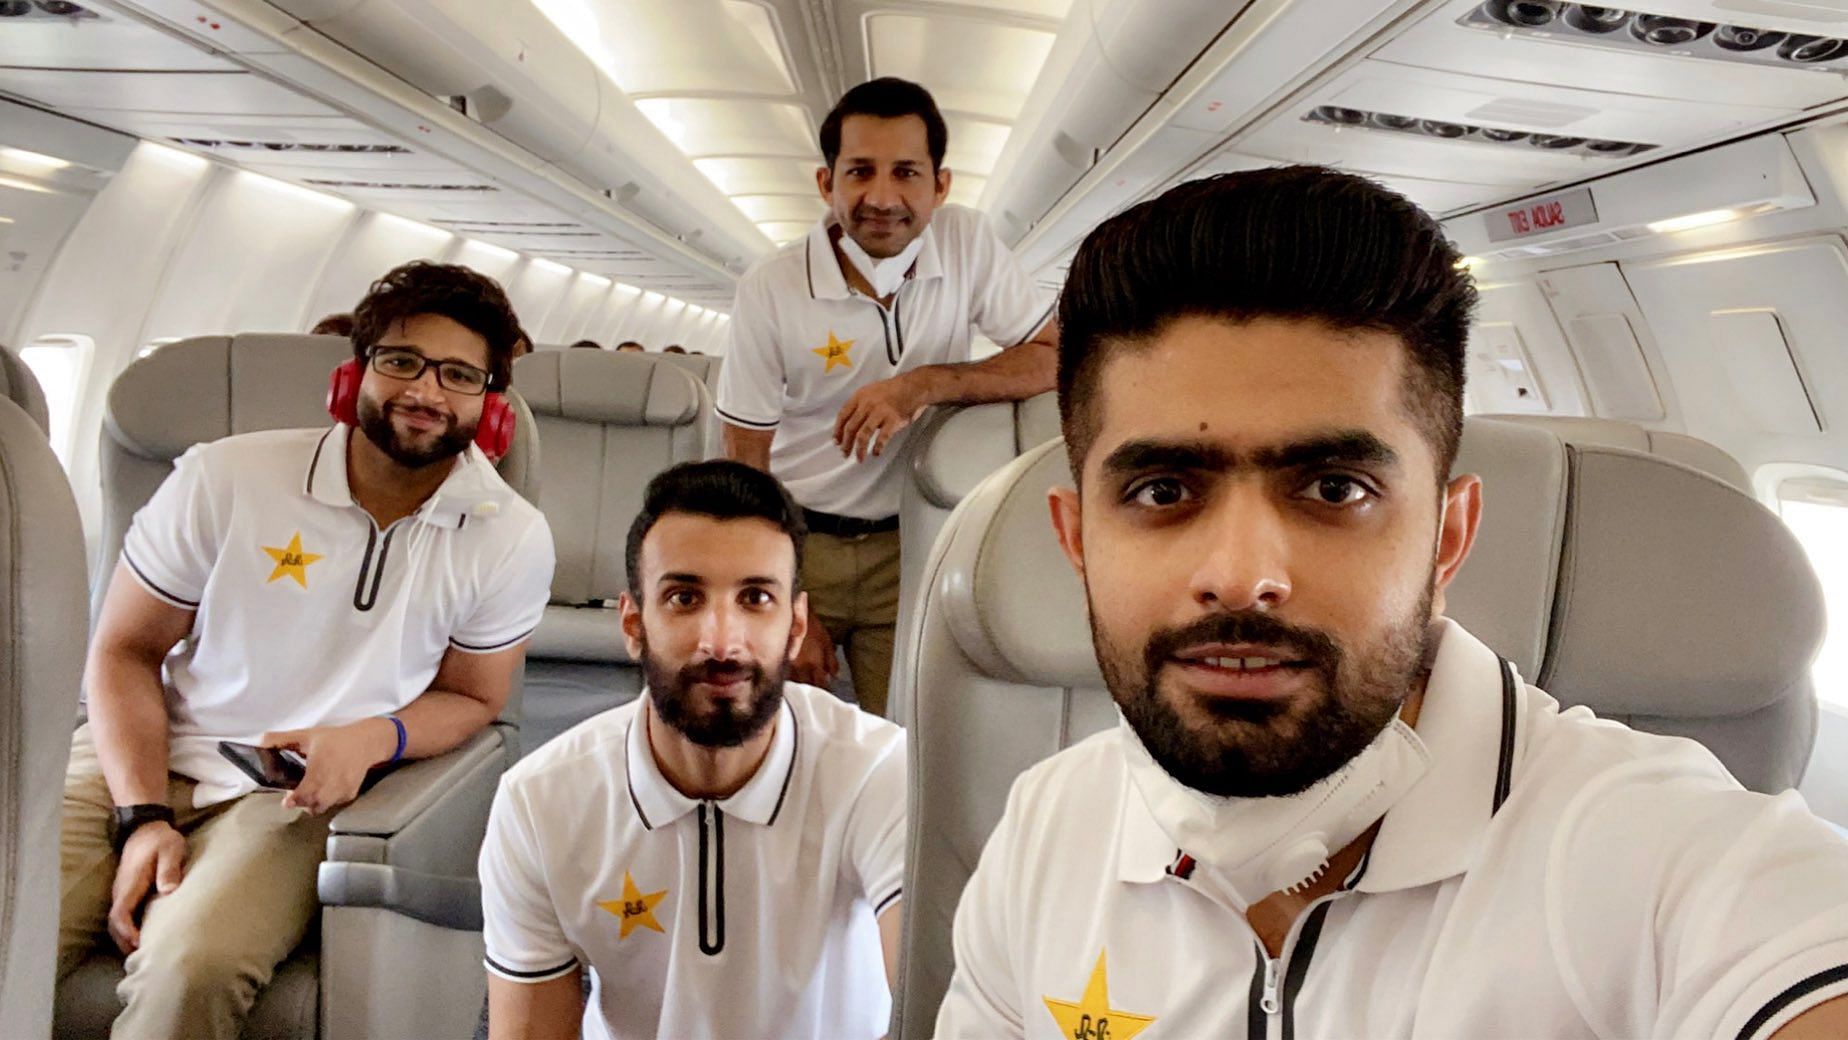 Pakistan’s team has reached England for the Test series in August.